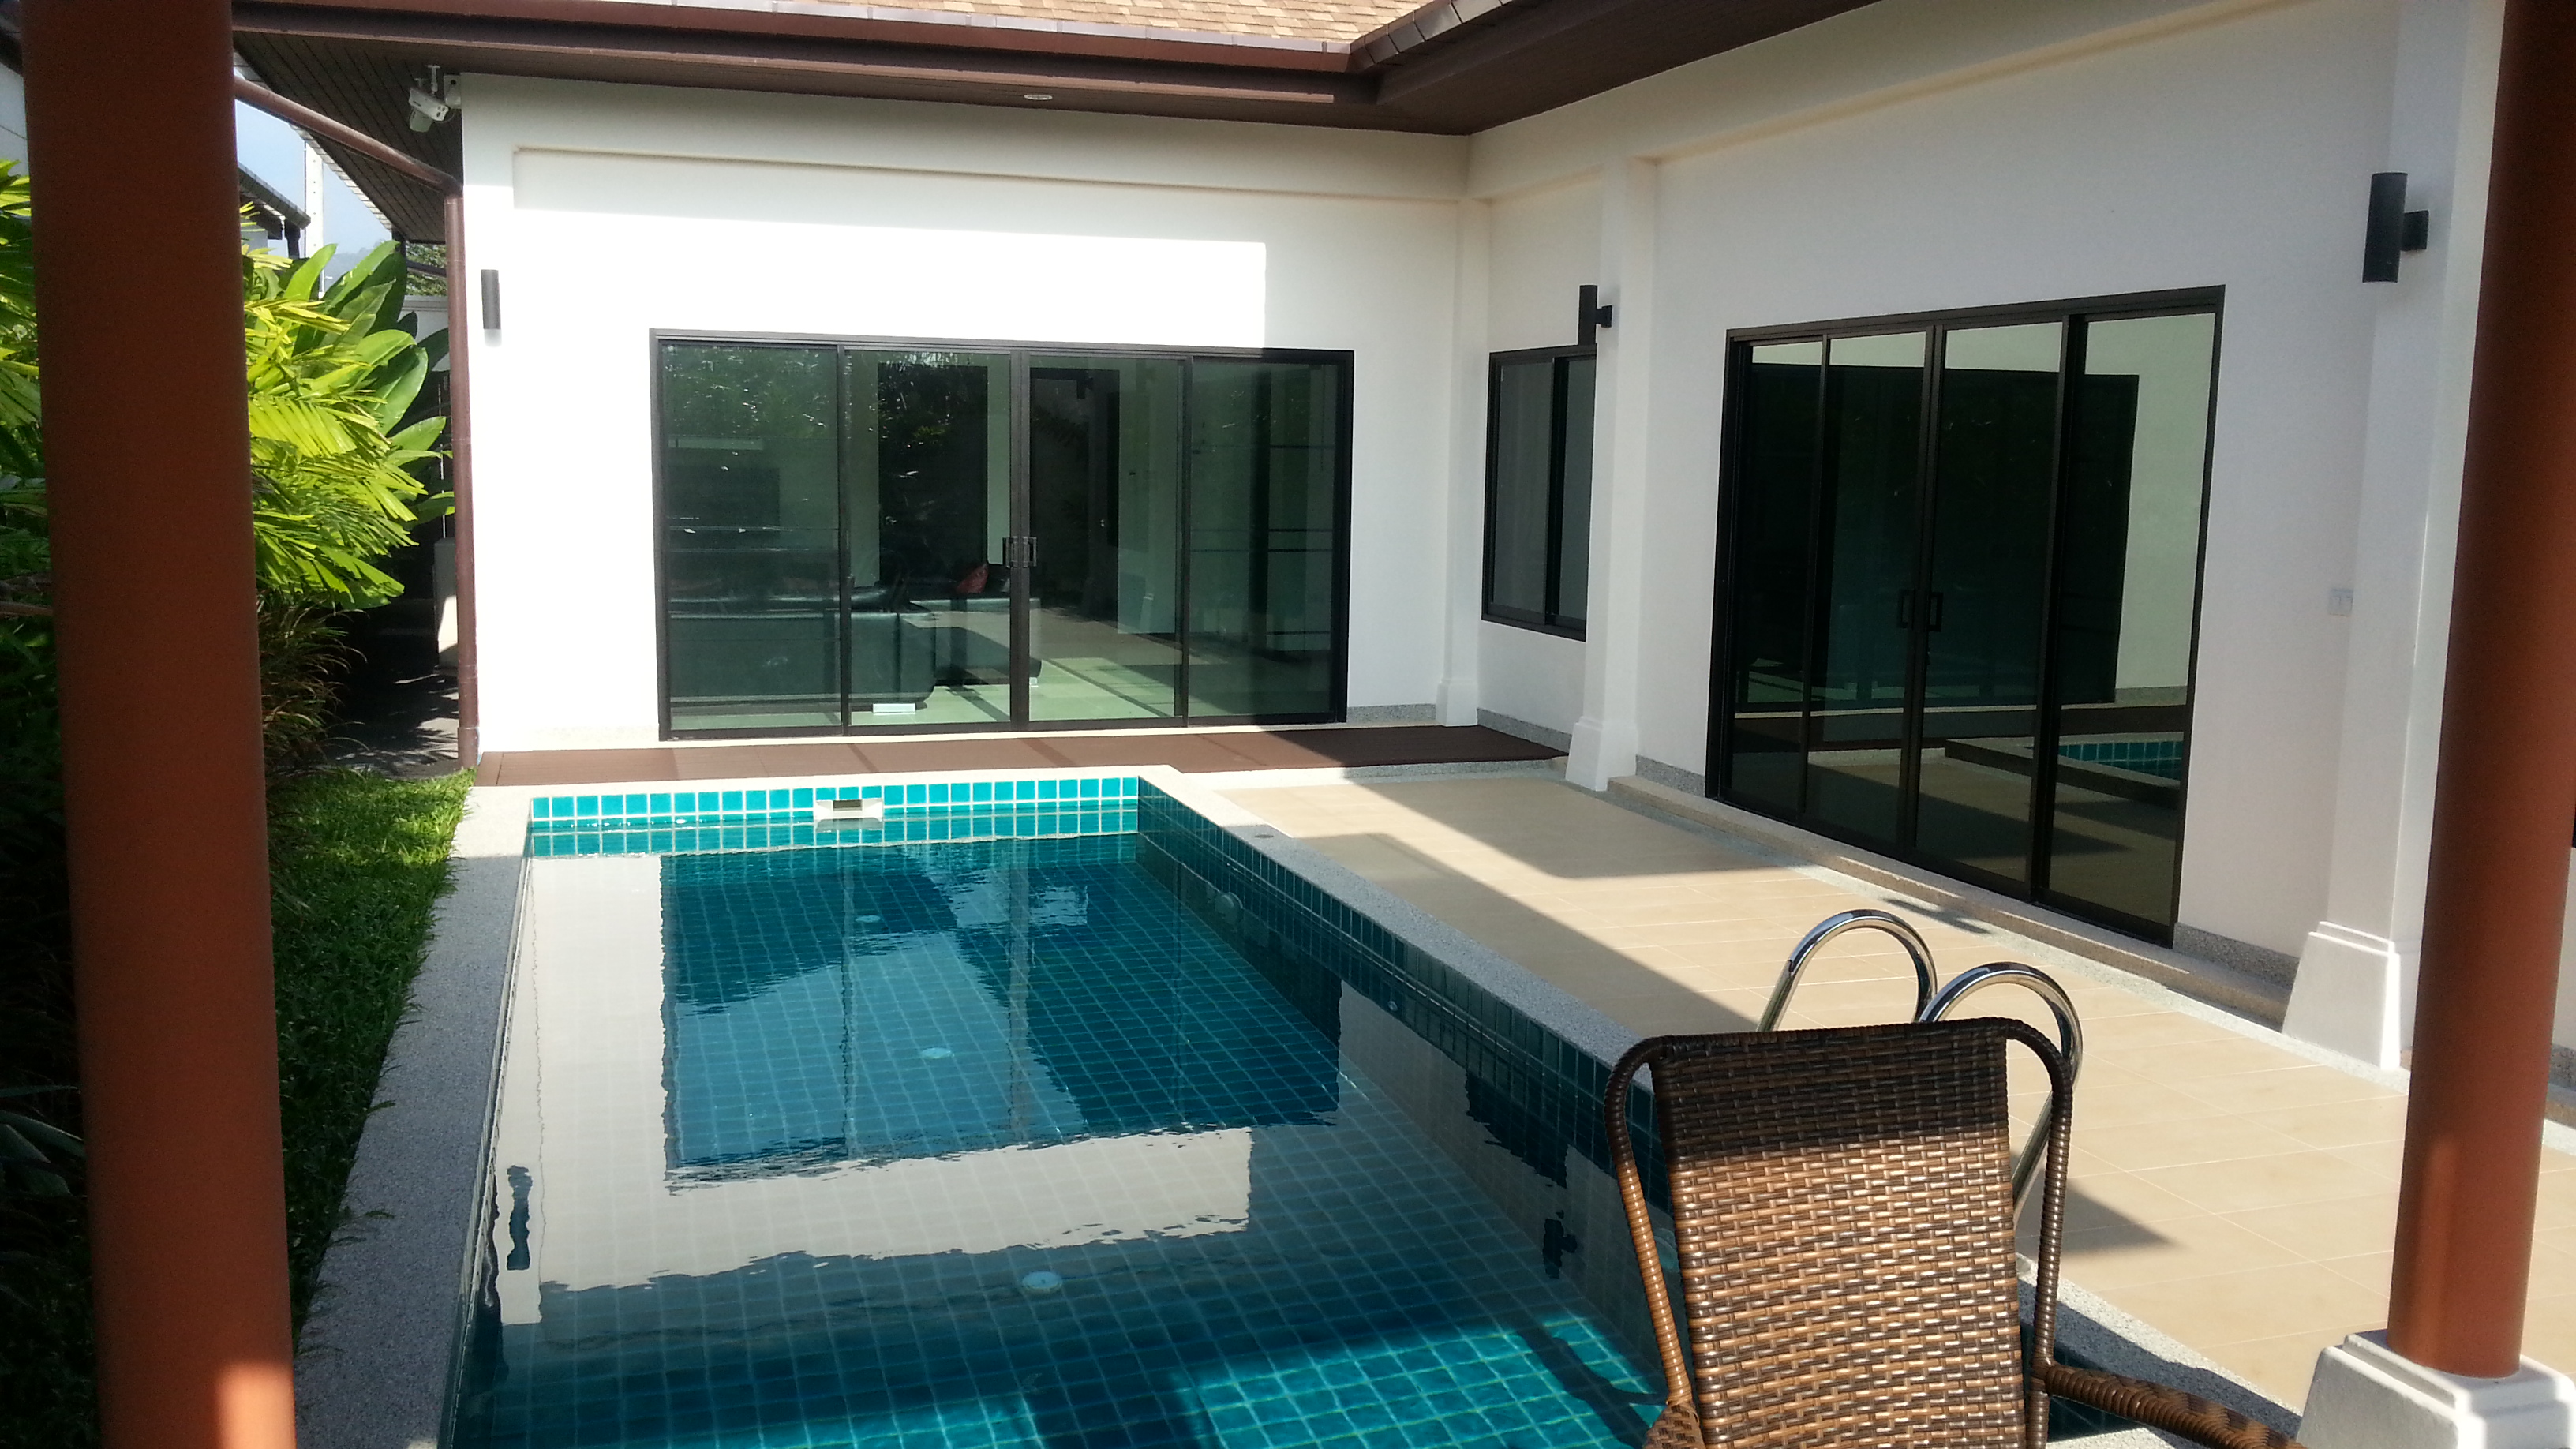 Pool villa is operated with salt water, very good for your skin and your eyes in Phuket